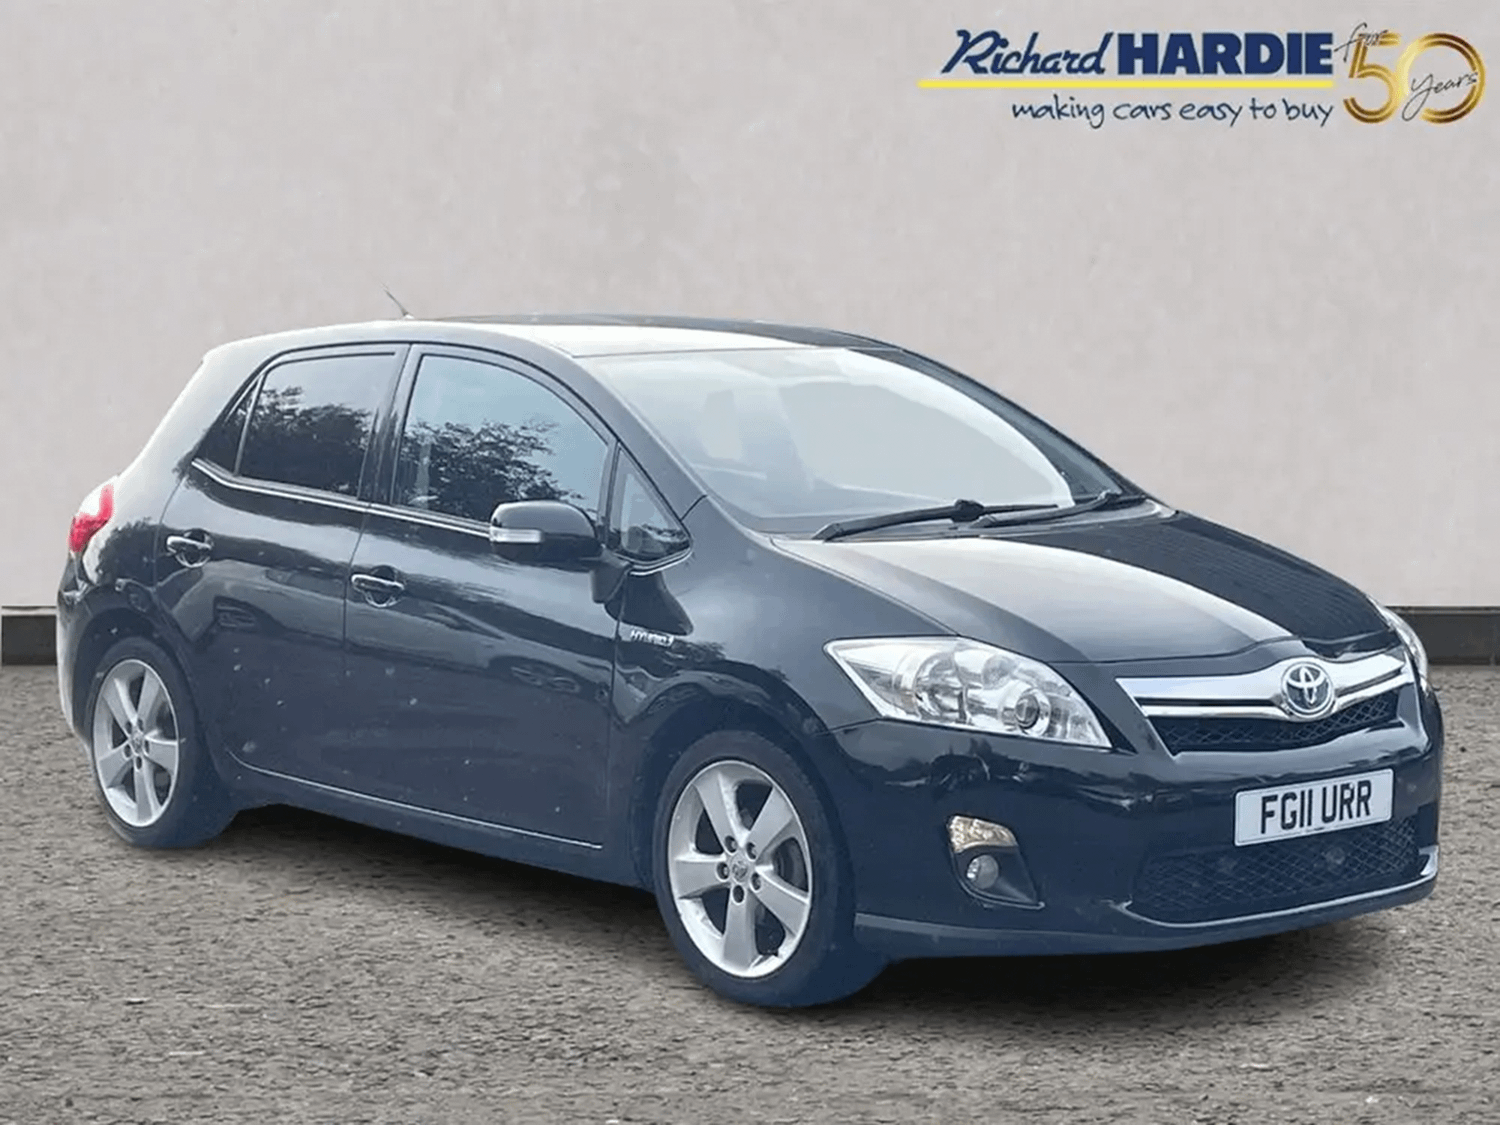 Used Toyota Auris for sale at Richard Hardie